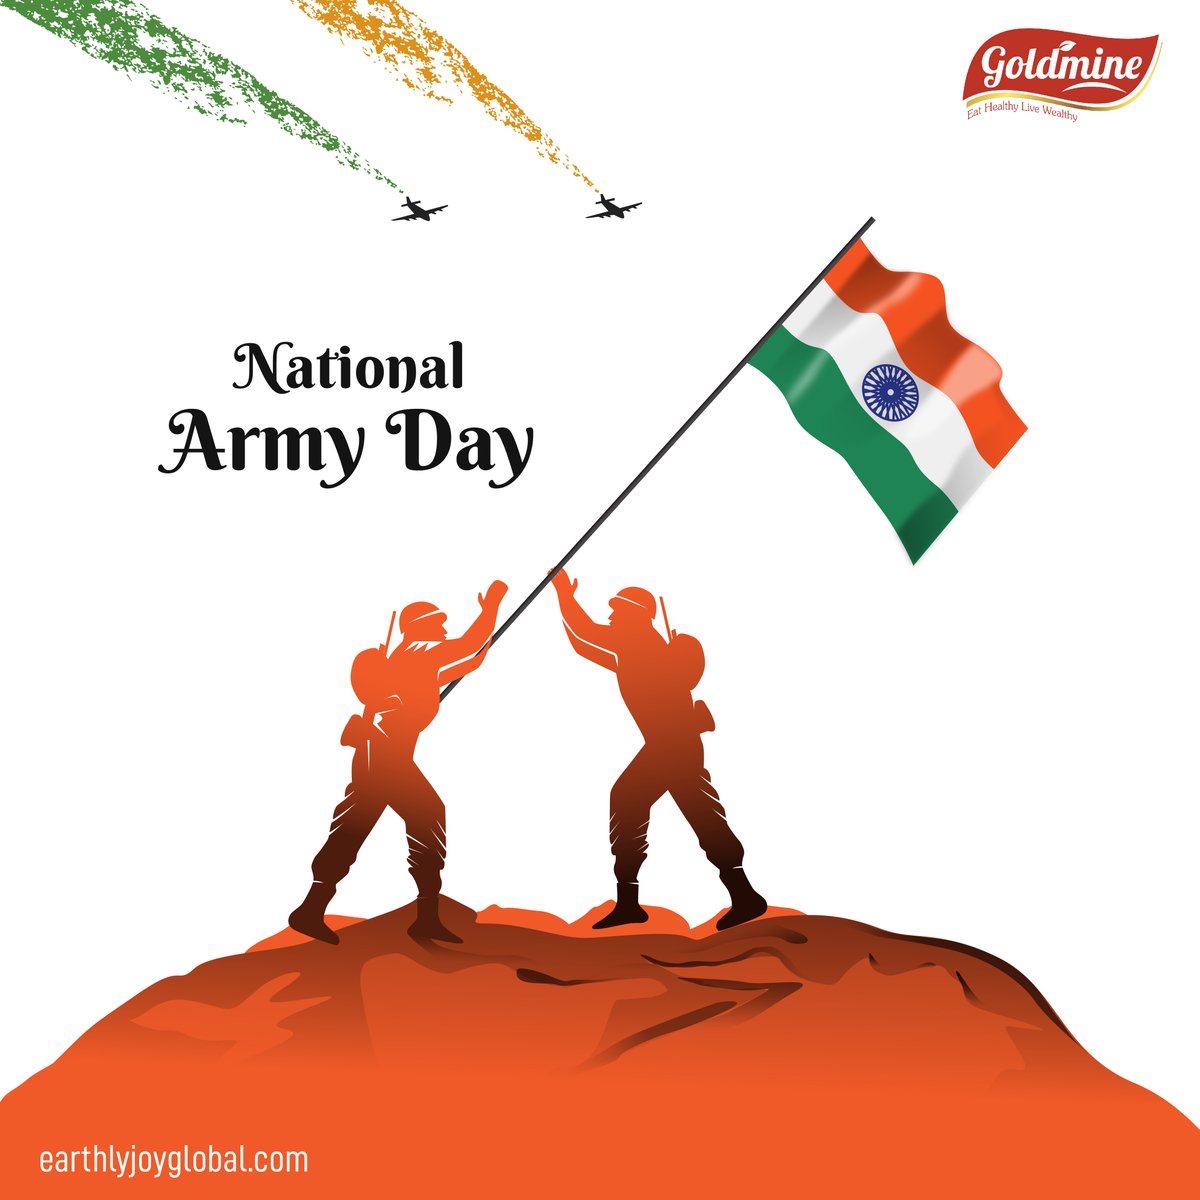 🇮🇳🎉 Let us celebrate Indian Army Day by saluting all the army men for their bravery, dedication, and patriotism. Happy Indian Army Day!🇮🇳🎉 
.
.
#indianarmy #india #indian #jaihind #army #indianarmyday #indianarmyforces